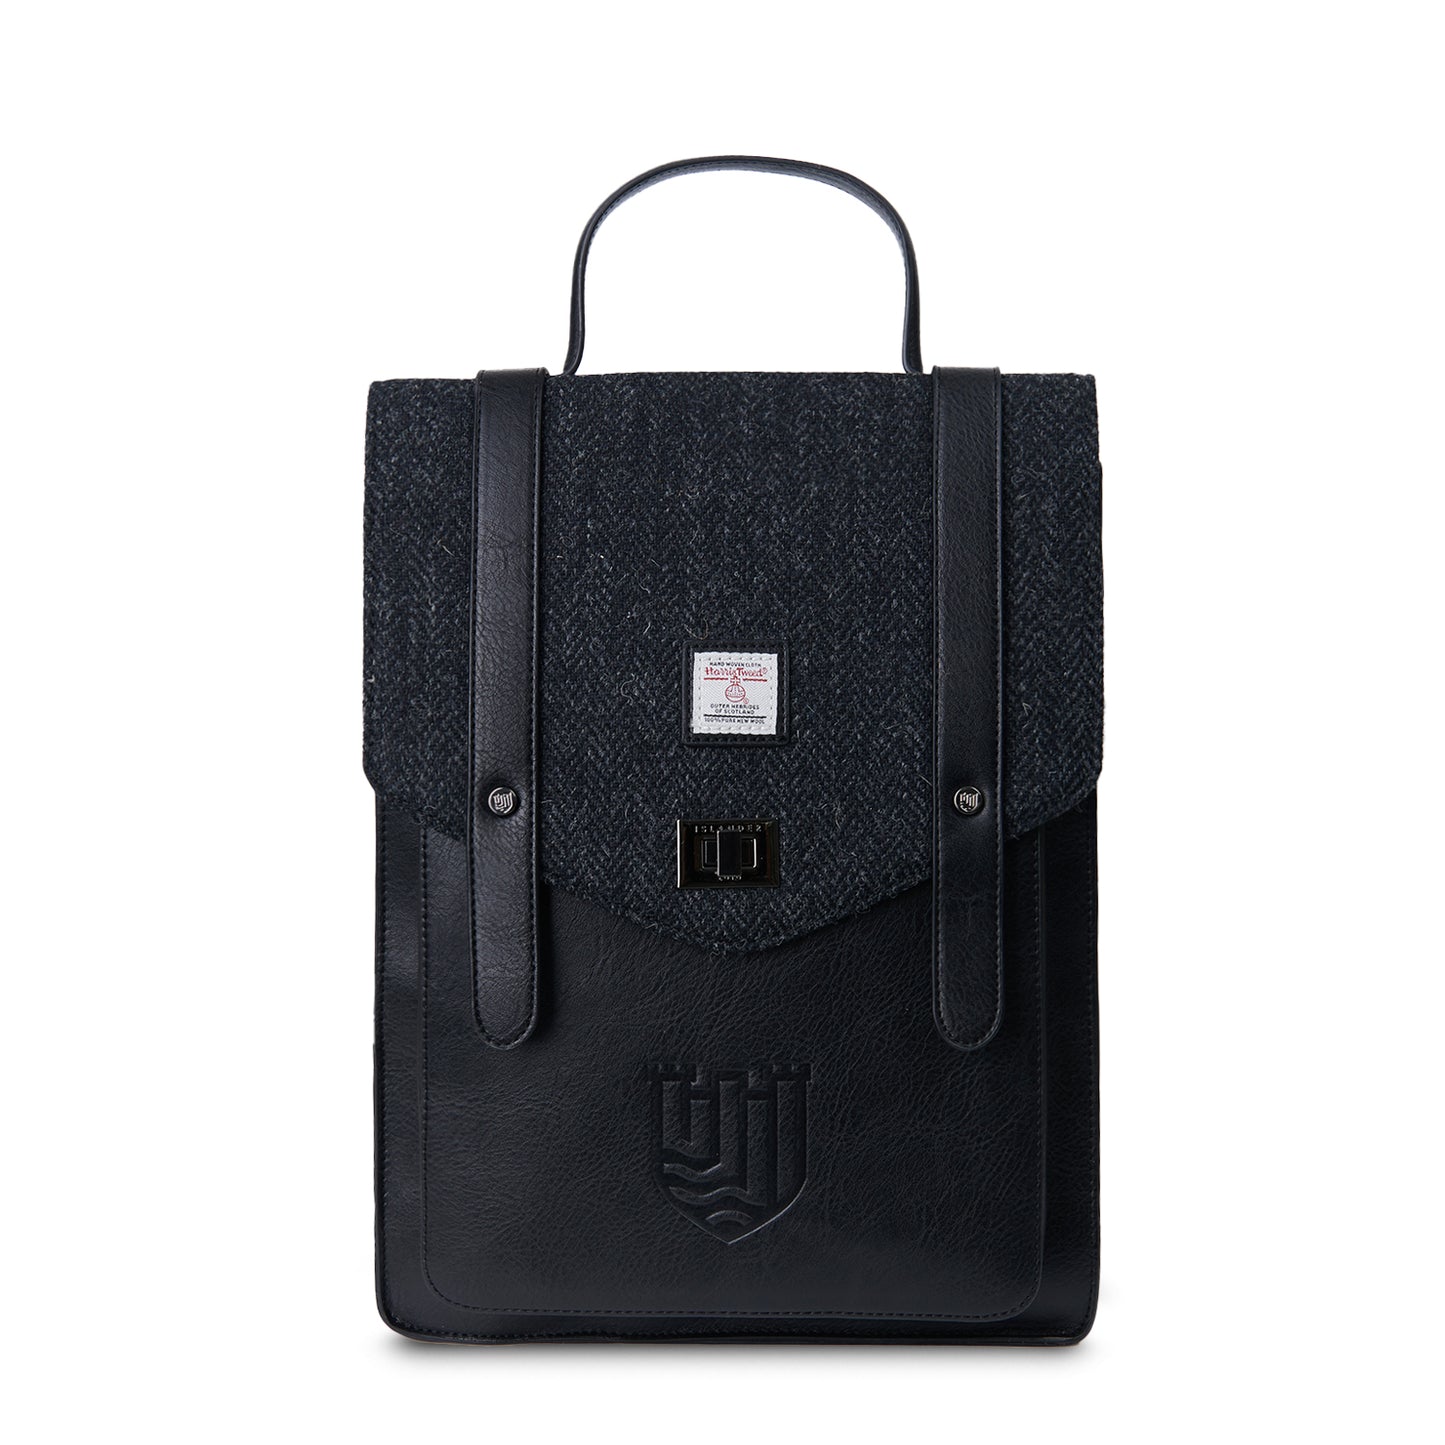 The Carloway Laptop Backpack